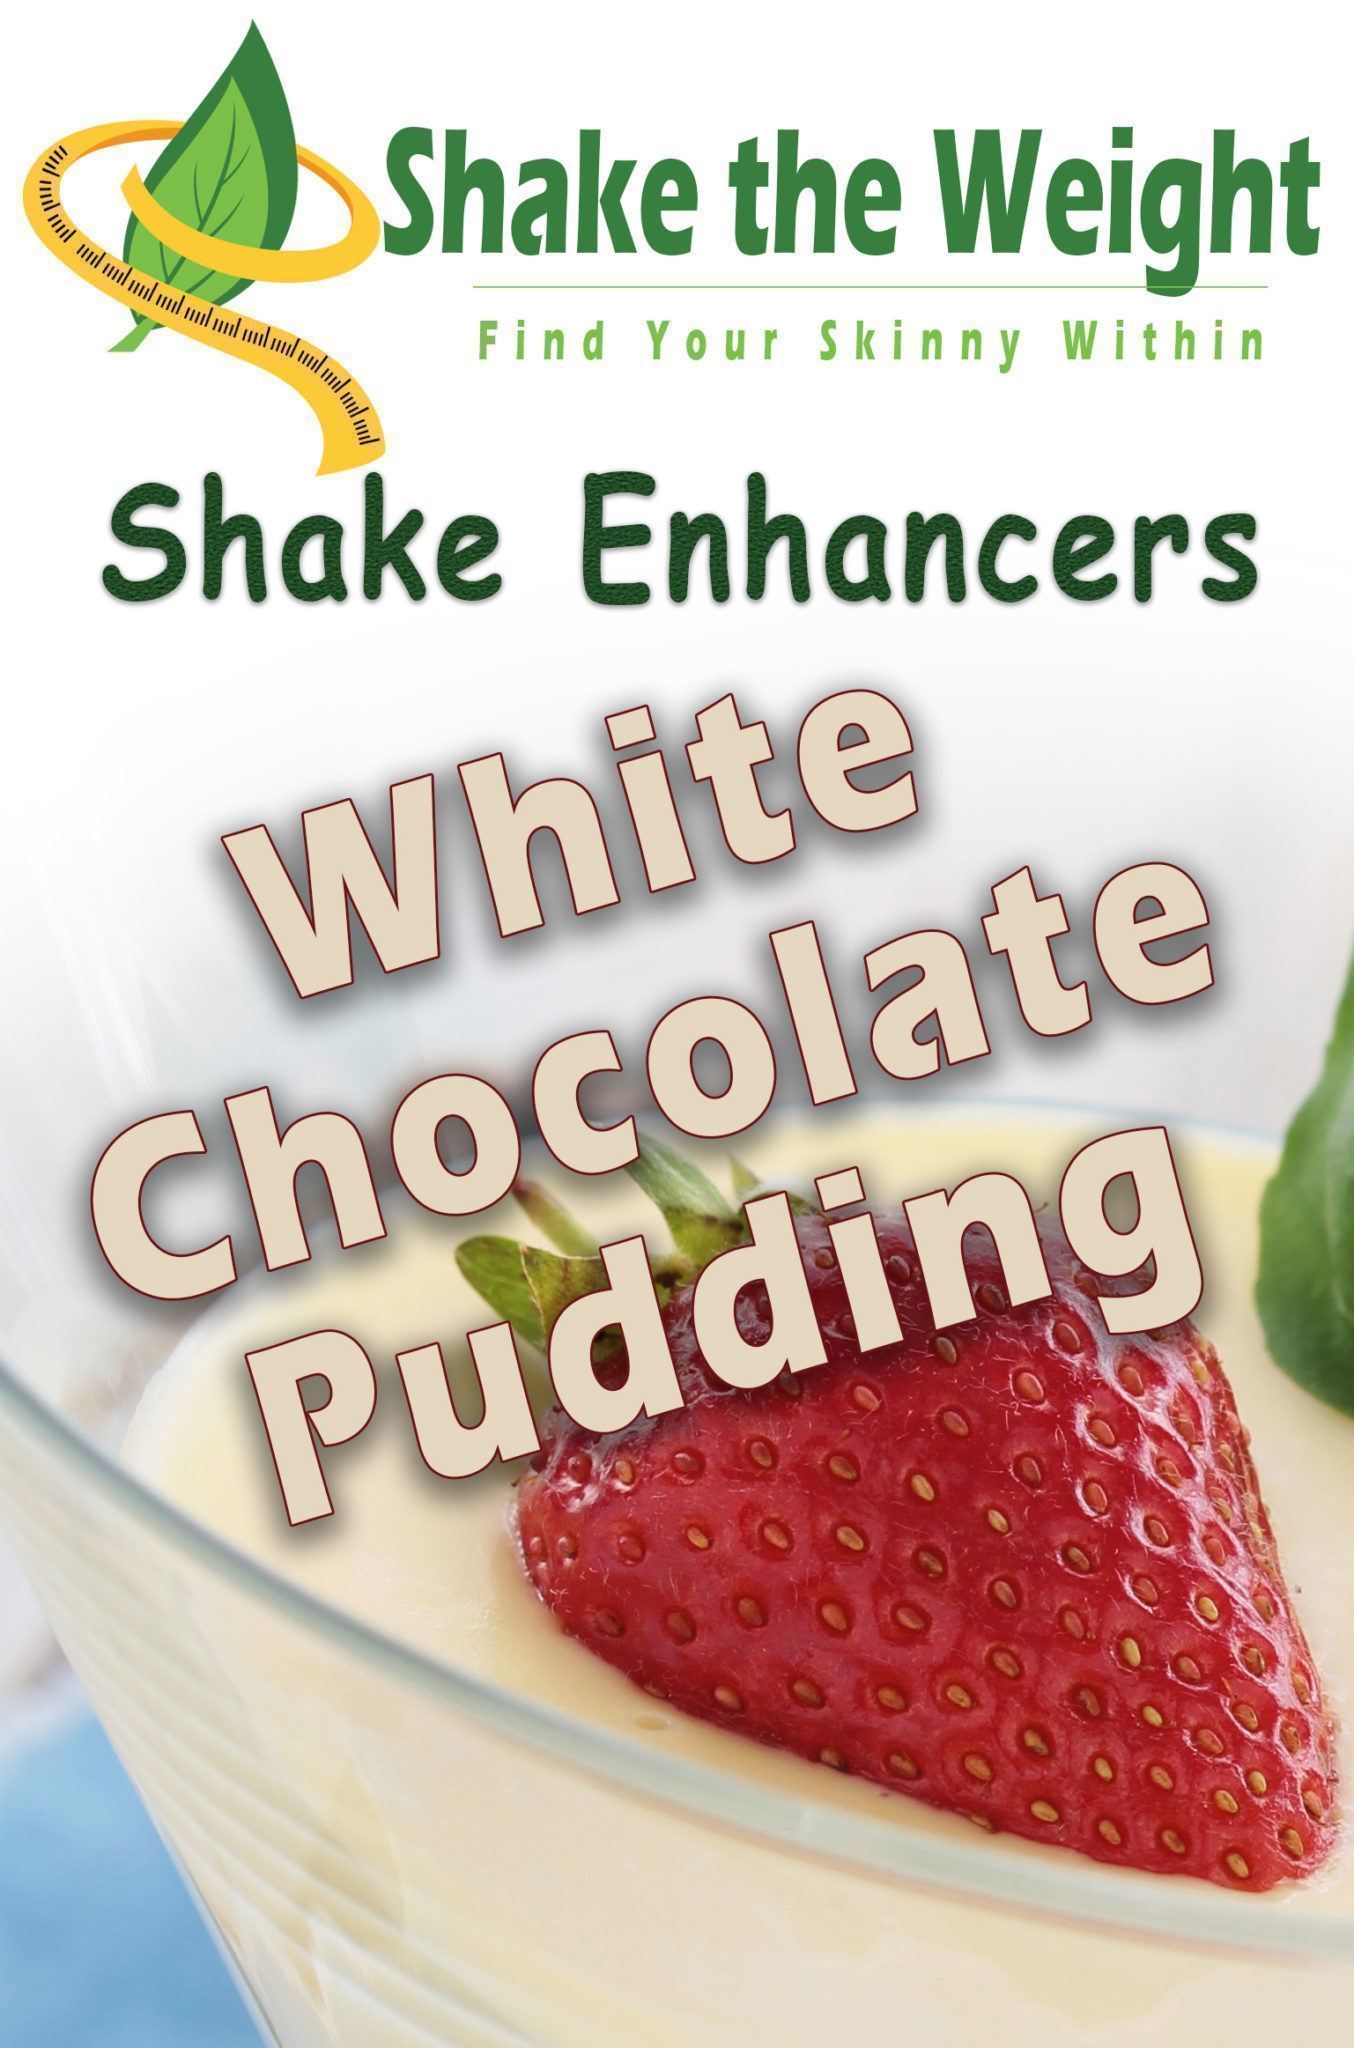 White Chocolate Pudding, meal replacement smoothies, weight loss smoothies, smoothie diet, meal replacement smoothie, smoothies for weight loss, smoothie meal replacement, protein smoothies, 	Sugar free jello